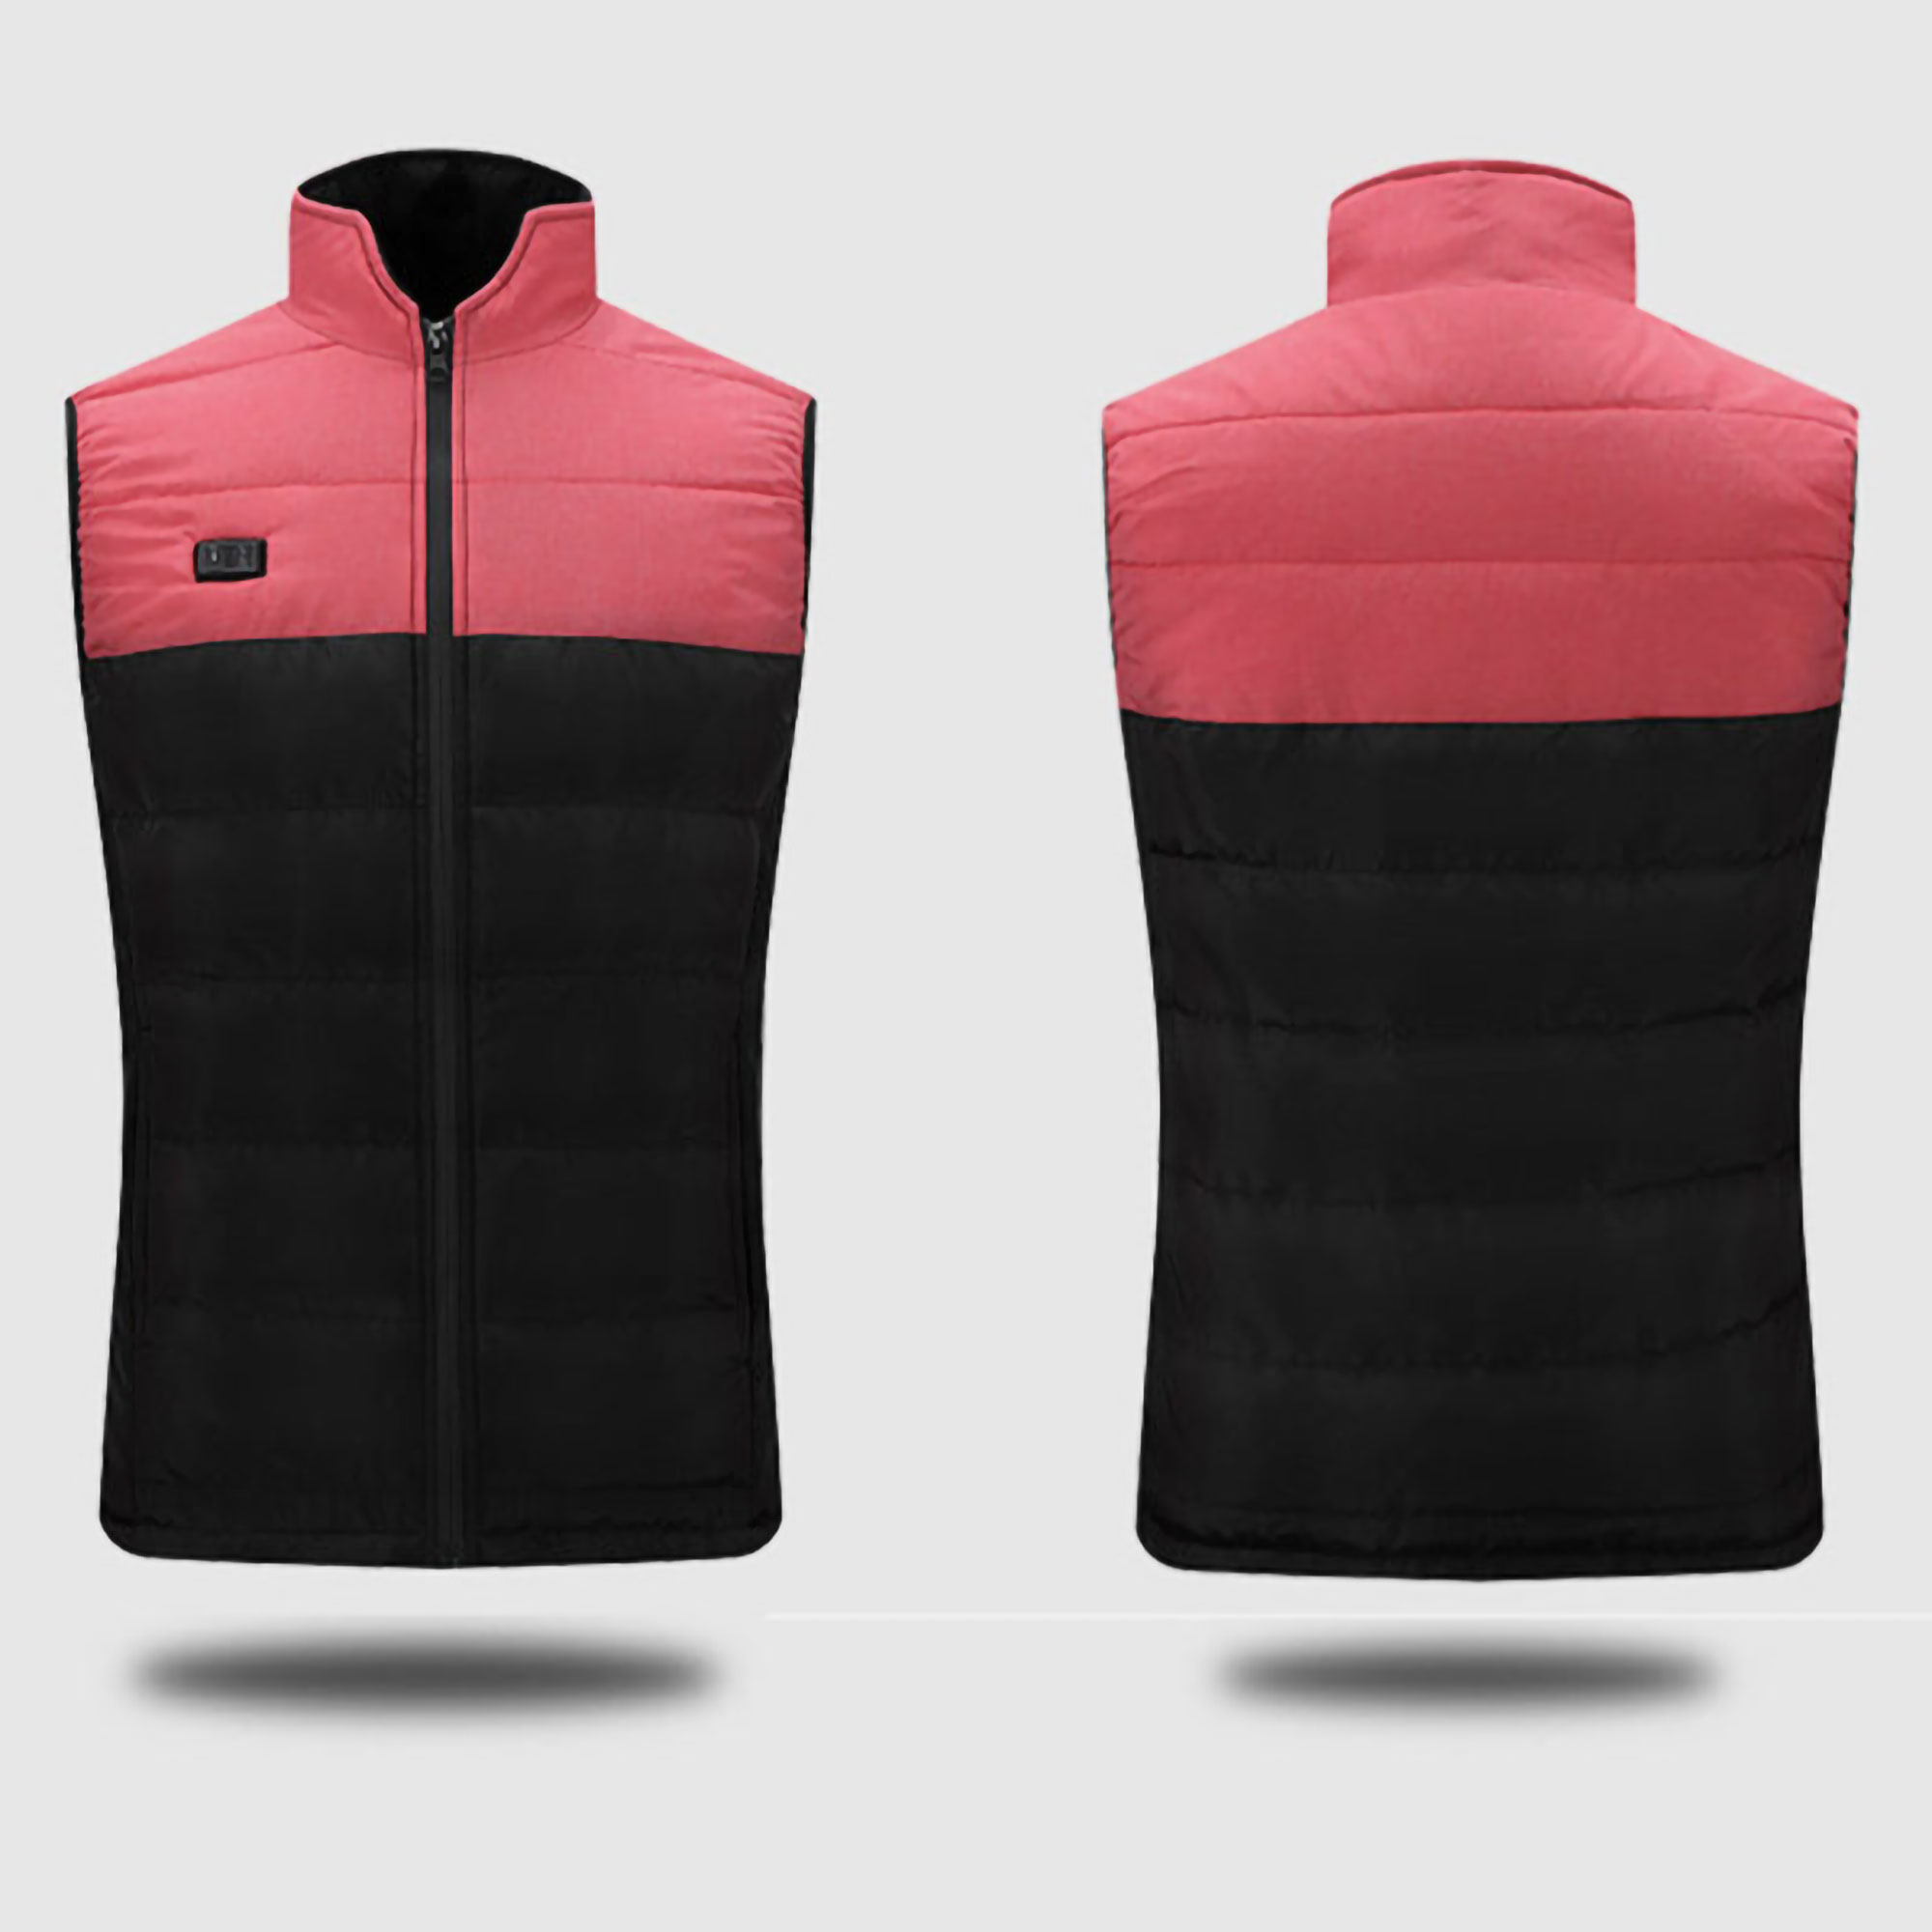 Sexy Dance Outdoor Thermal Heated Vest for Men Women Electric Coat Sleeveless Zipper Heating Jacket Winter Warmth Outwear With Battery Pack - image 3 of 3